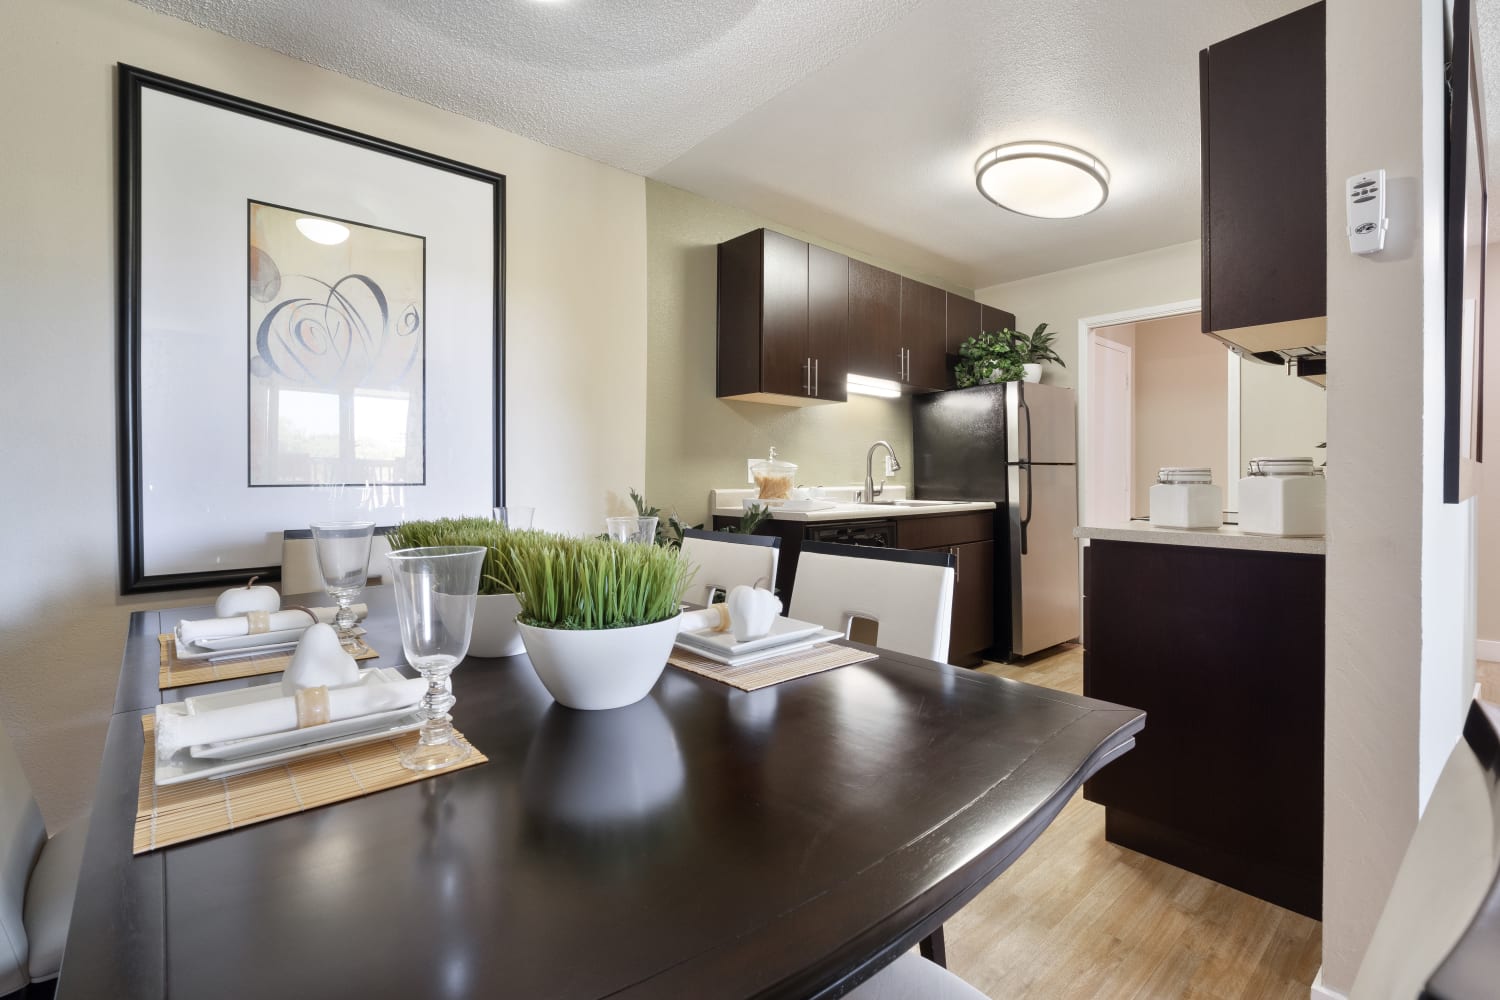 Open dining area at Harbor Cove Apartments in Foster City, California